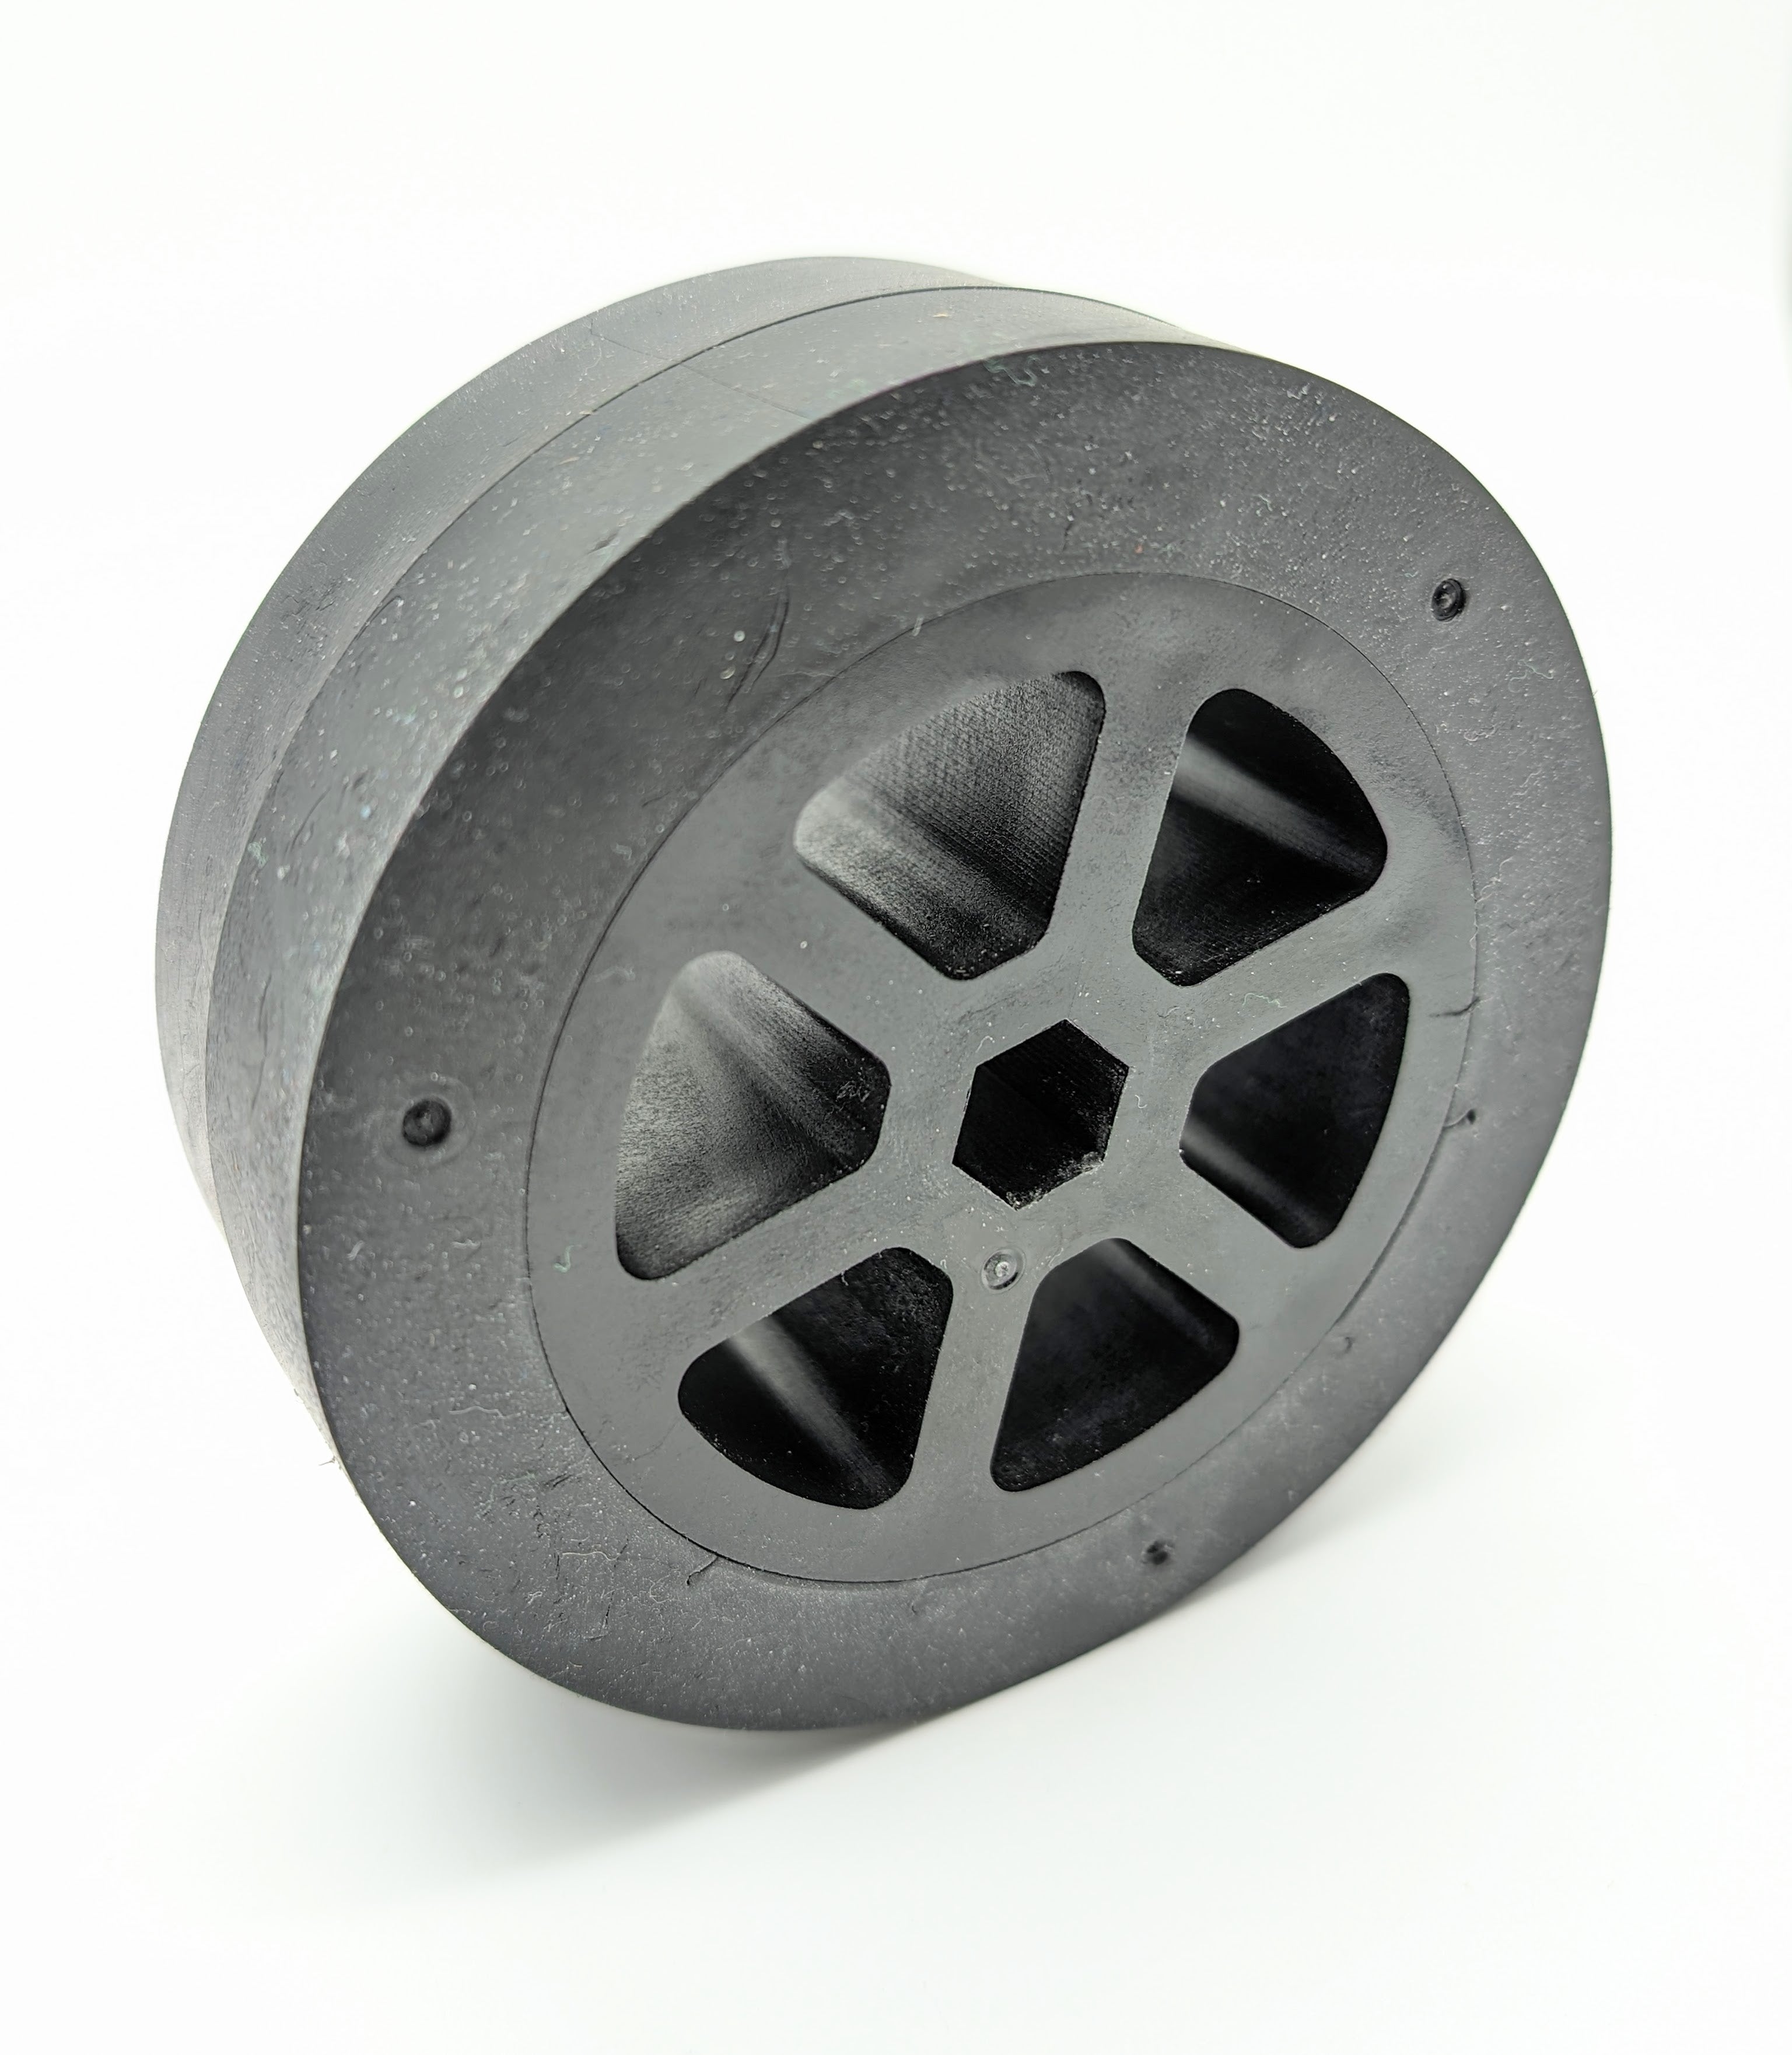 4" Solid Urethane Wheel 1/2" Hex Bore - 45A Durometer